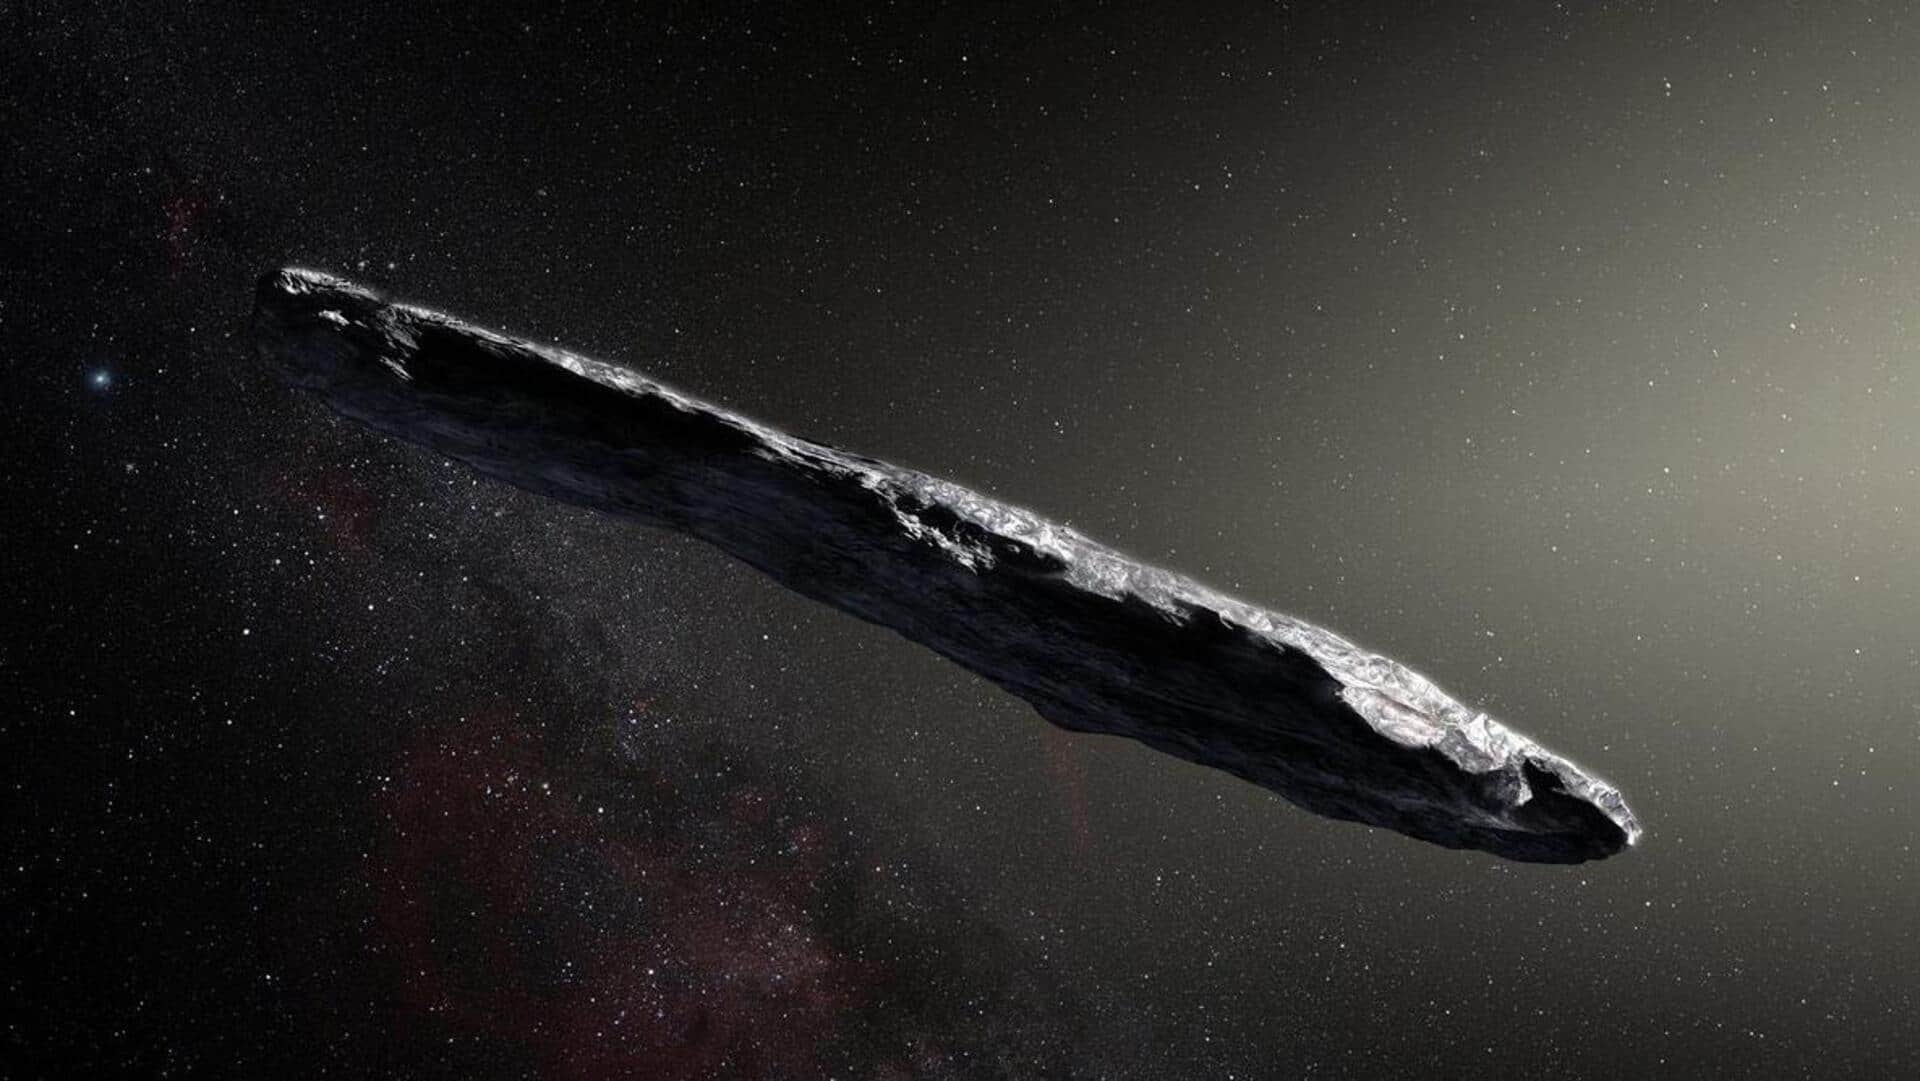 Scientists close in on origins of interstellar objects